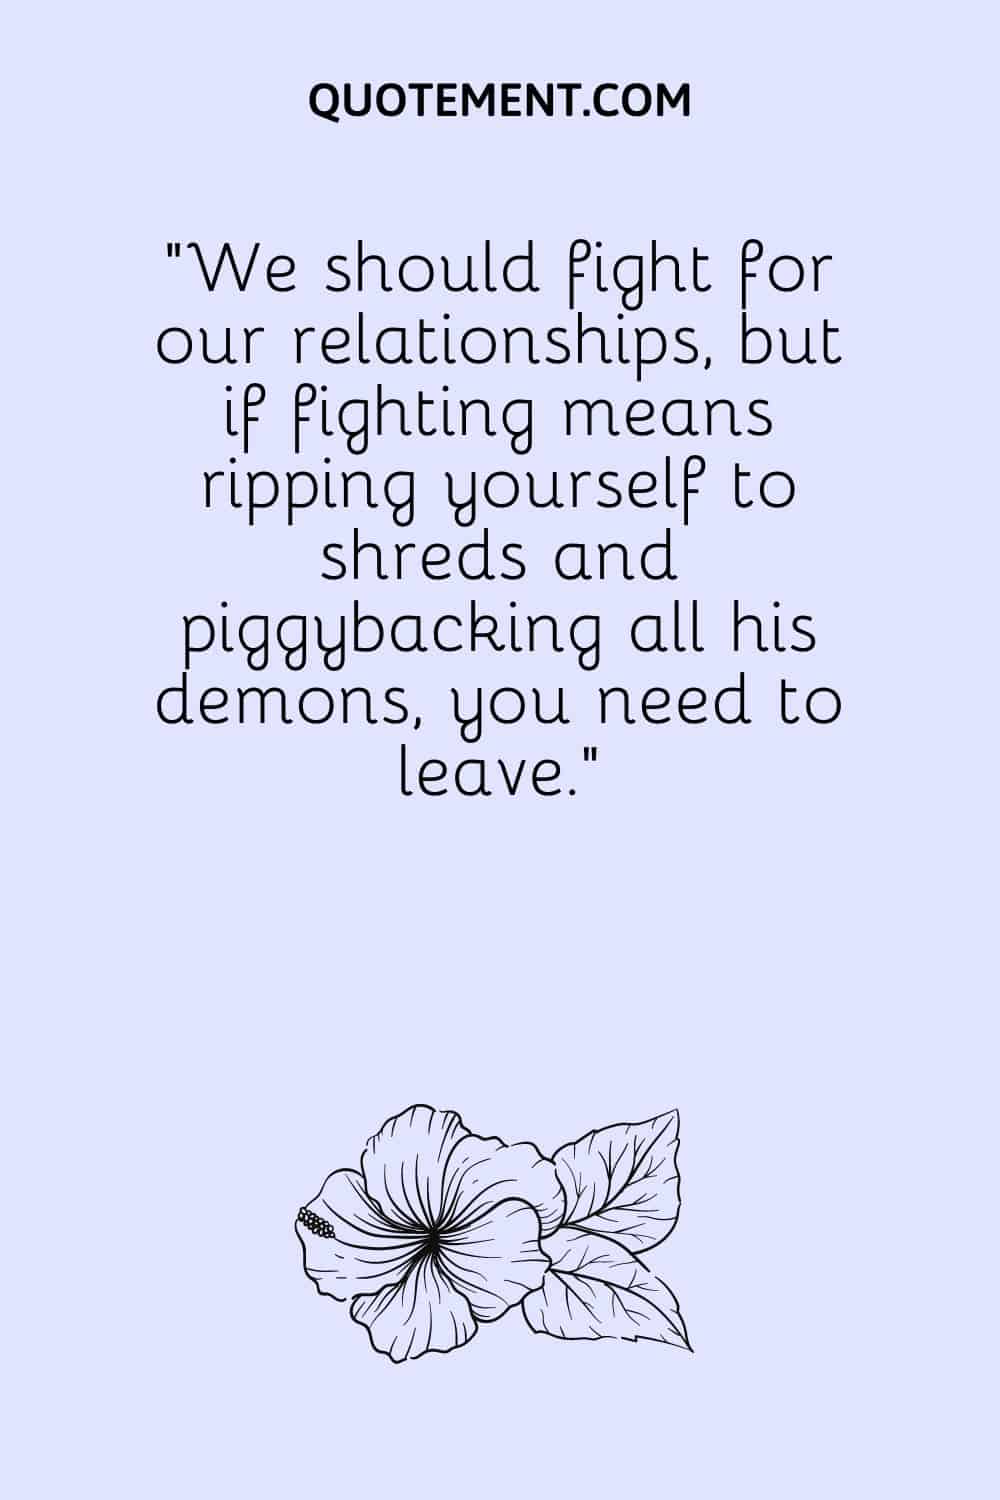 We should fight for our relationships